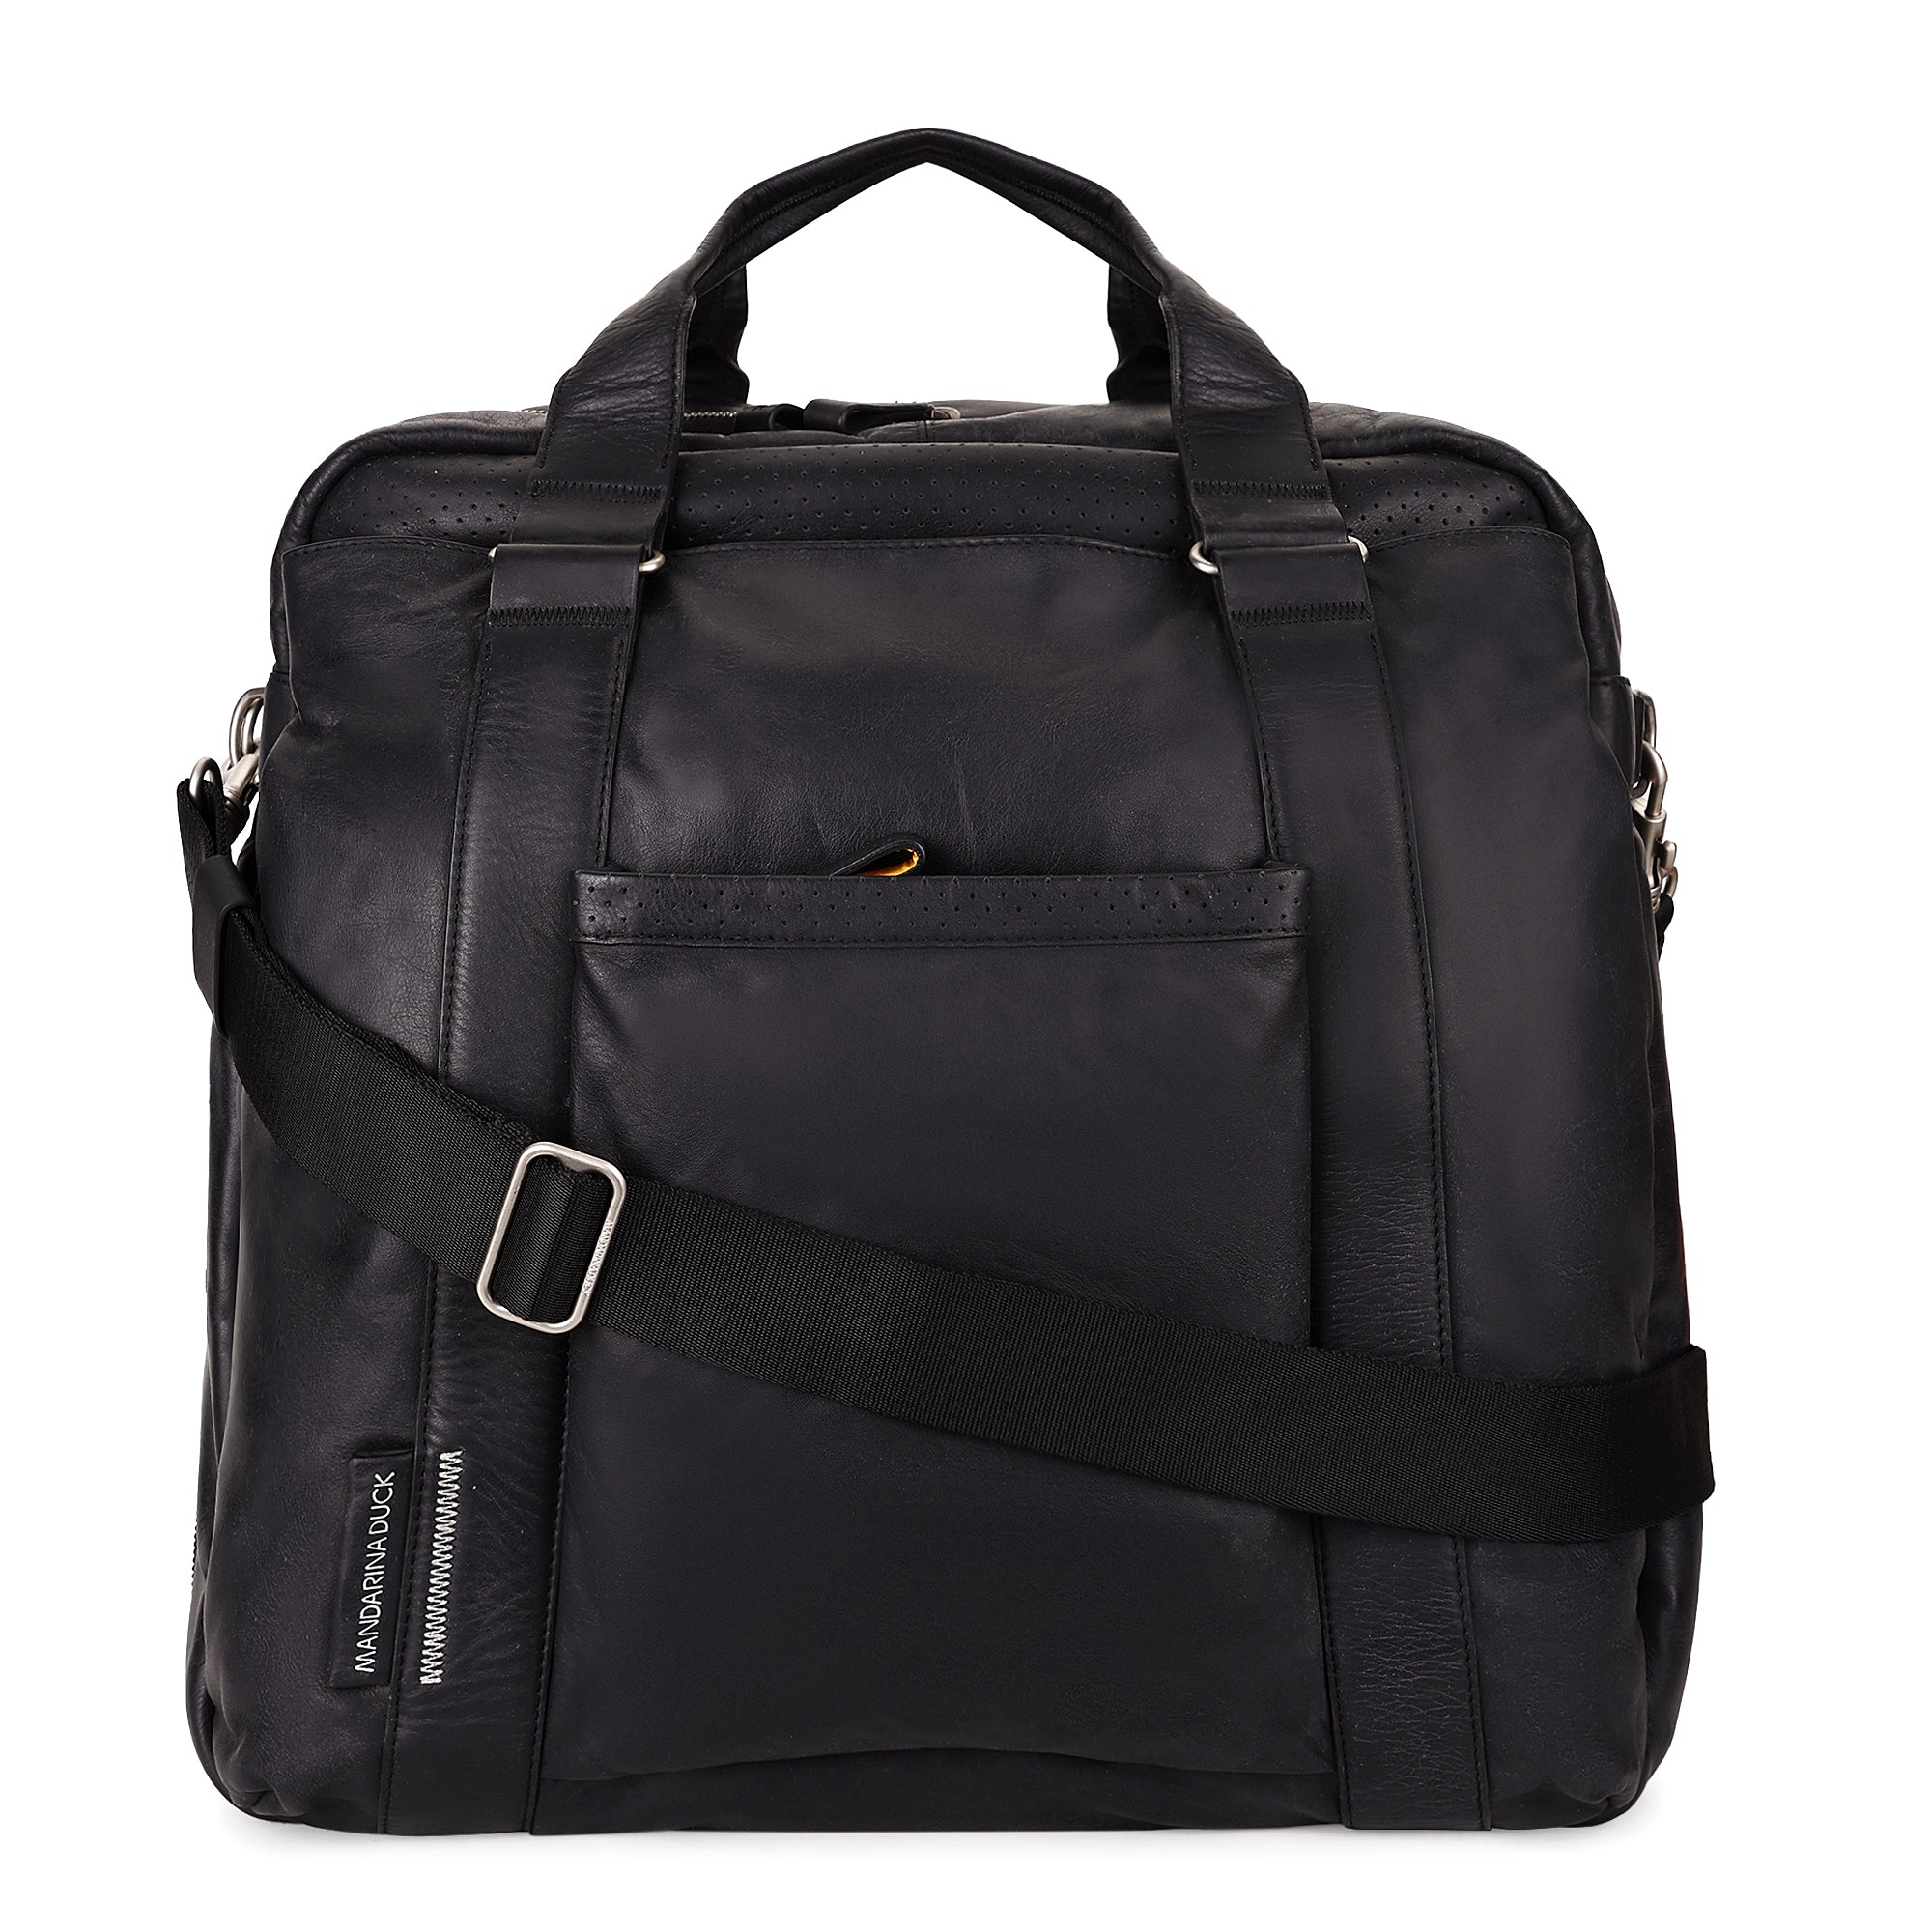 Grace Collection Limited Edition Genuine Leather Black Cabin Luggage Bag - Mandarina Duck